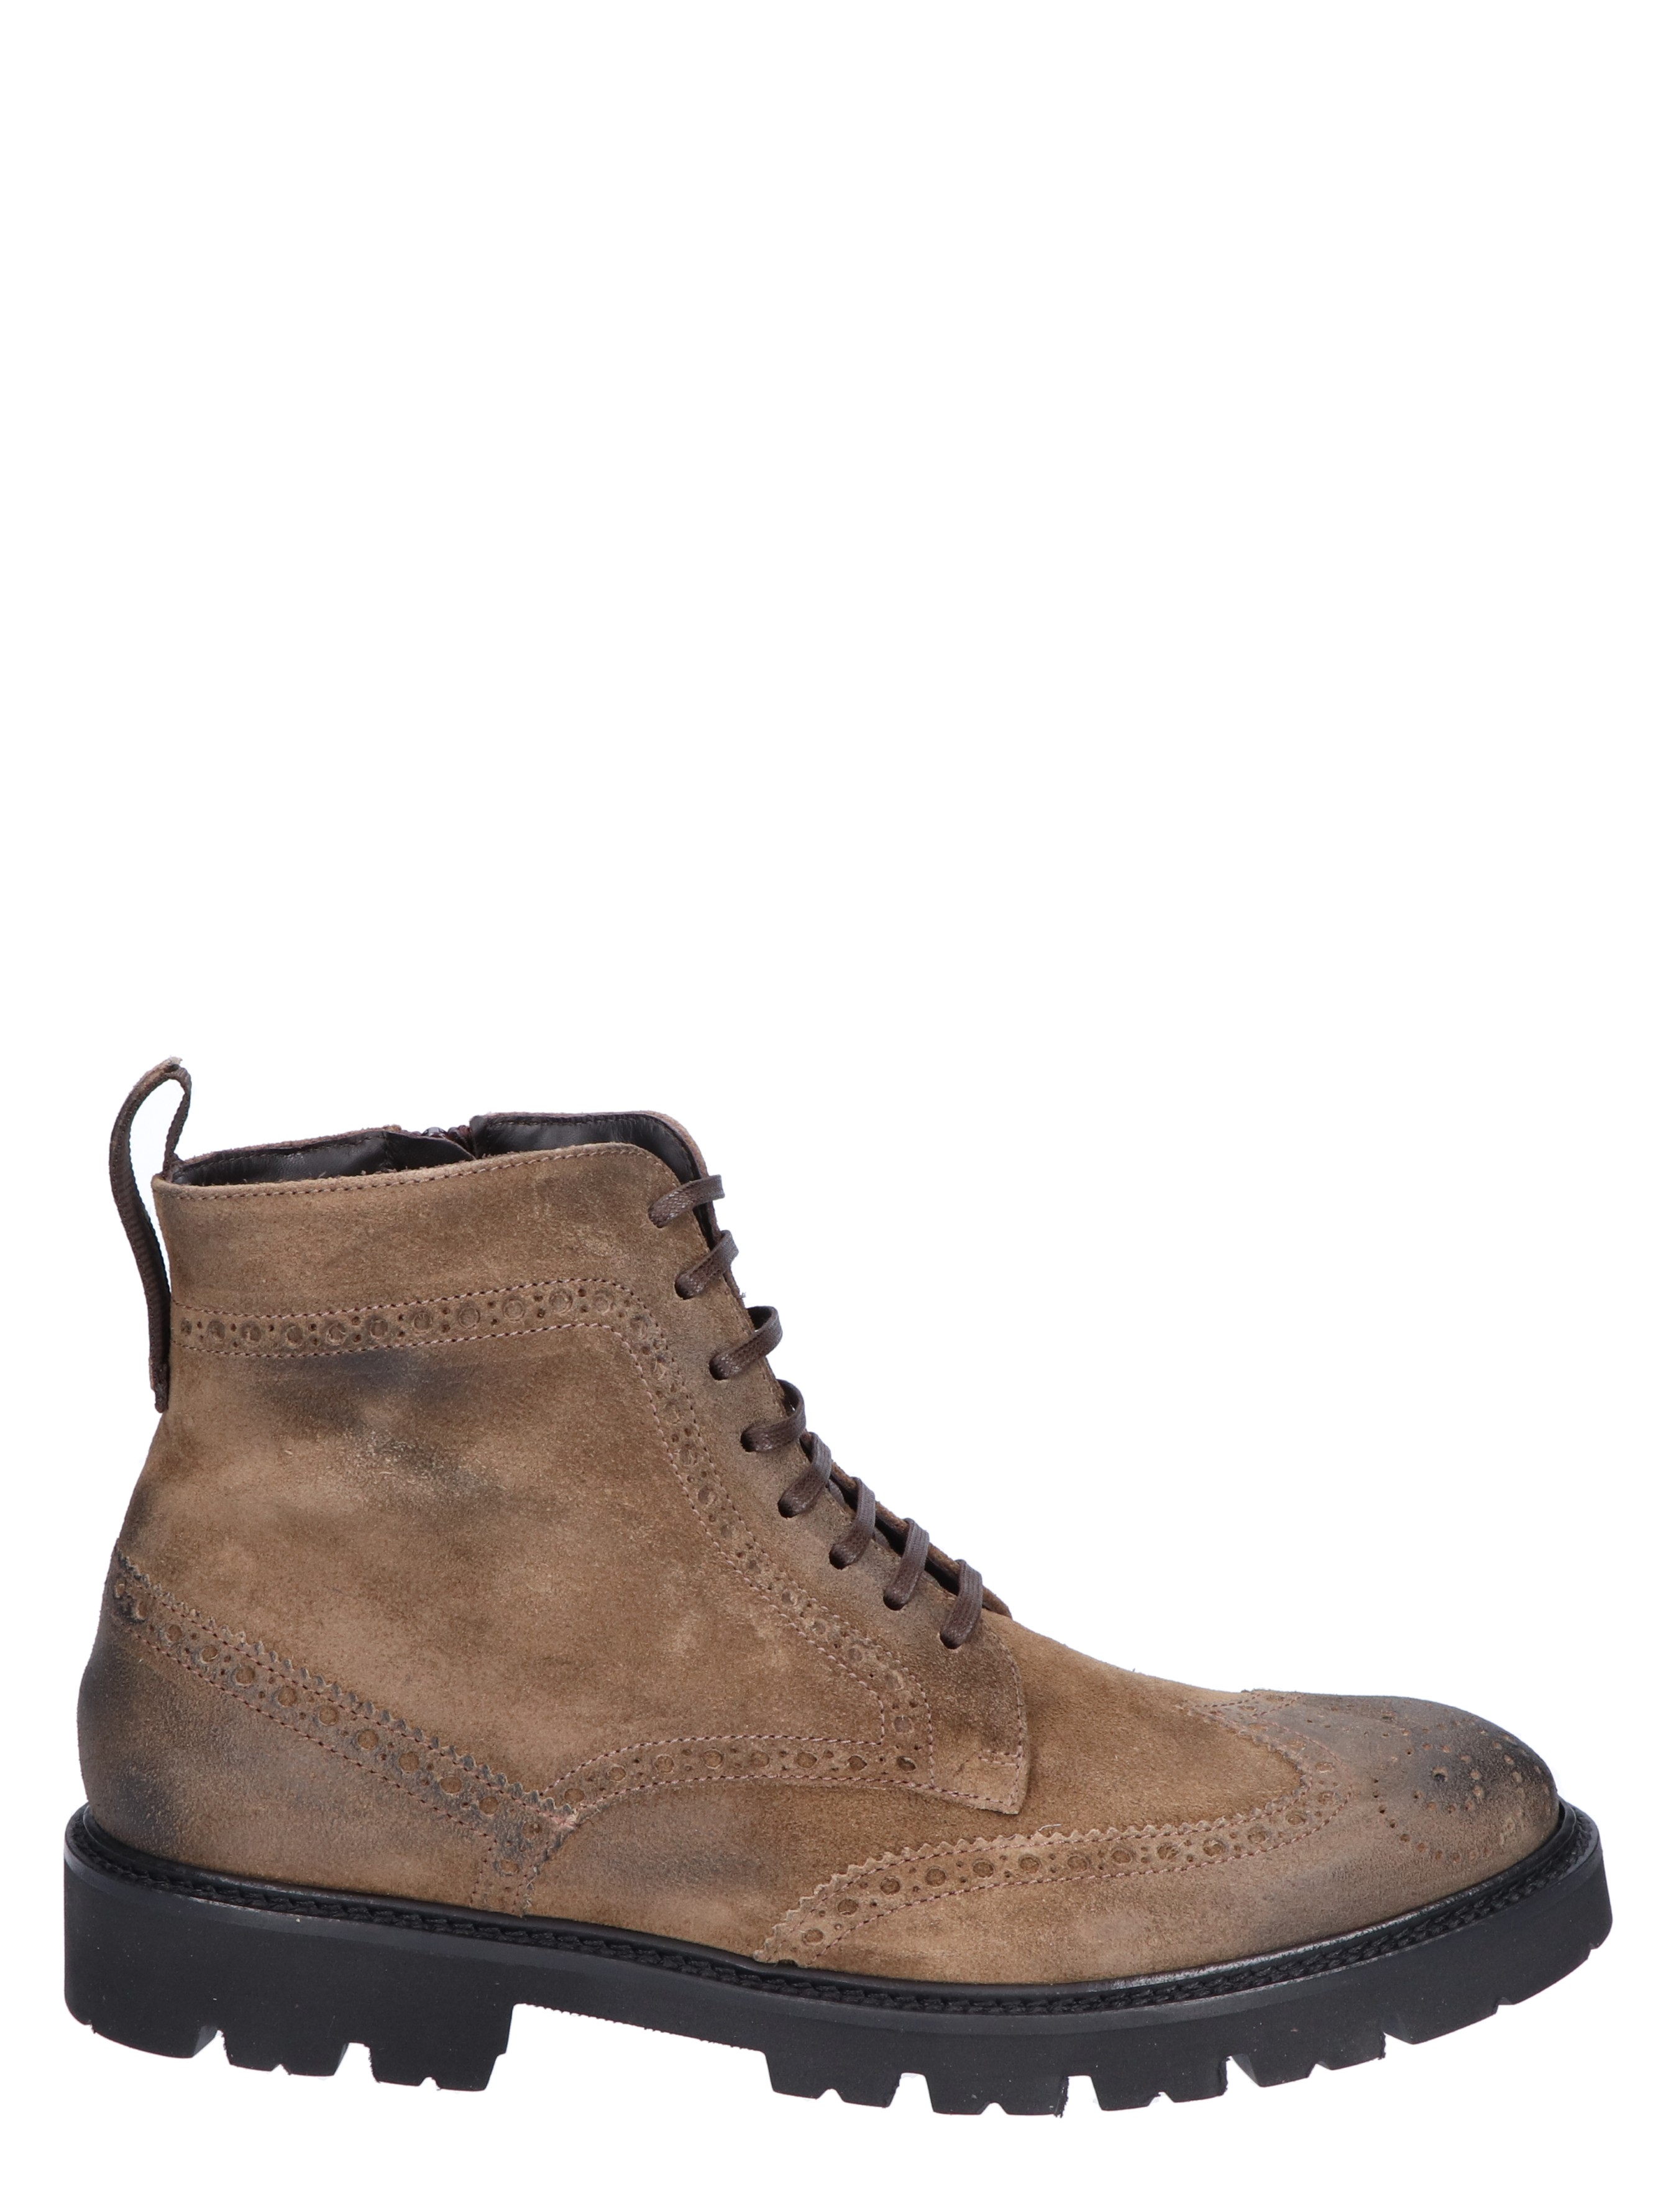 Daniel kenneth Serge Taupe Veter boots